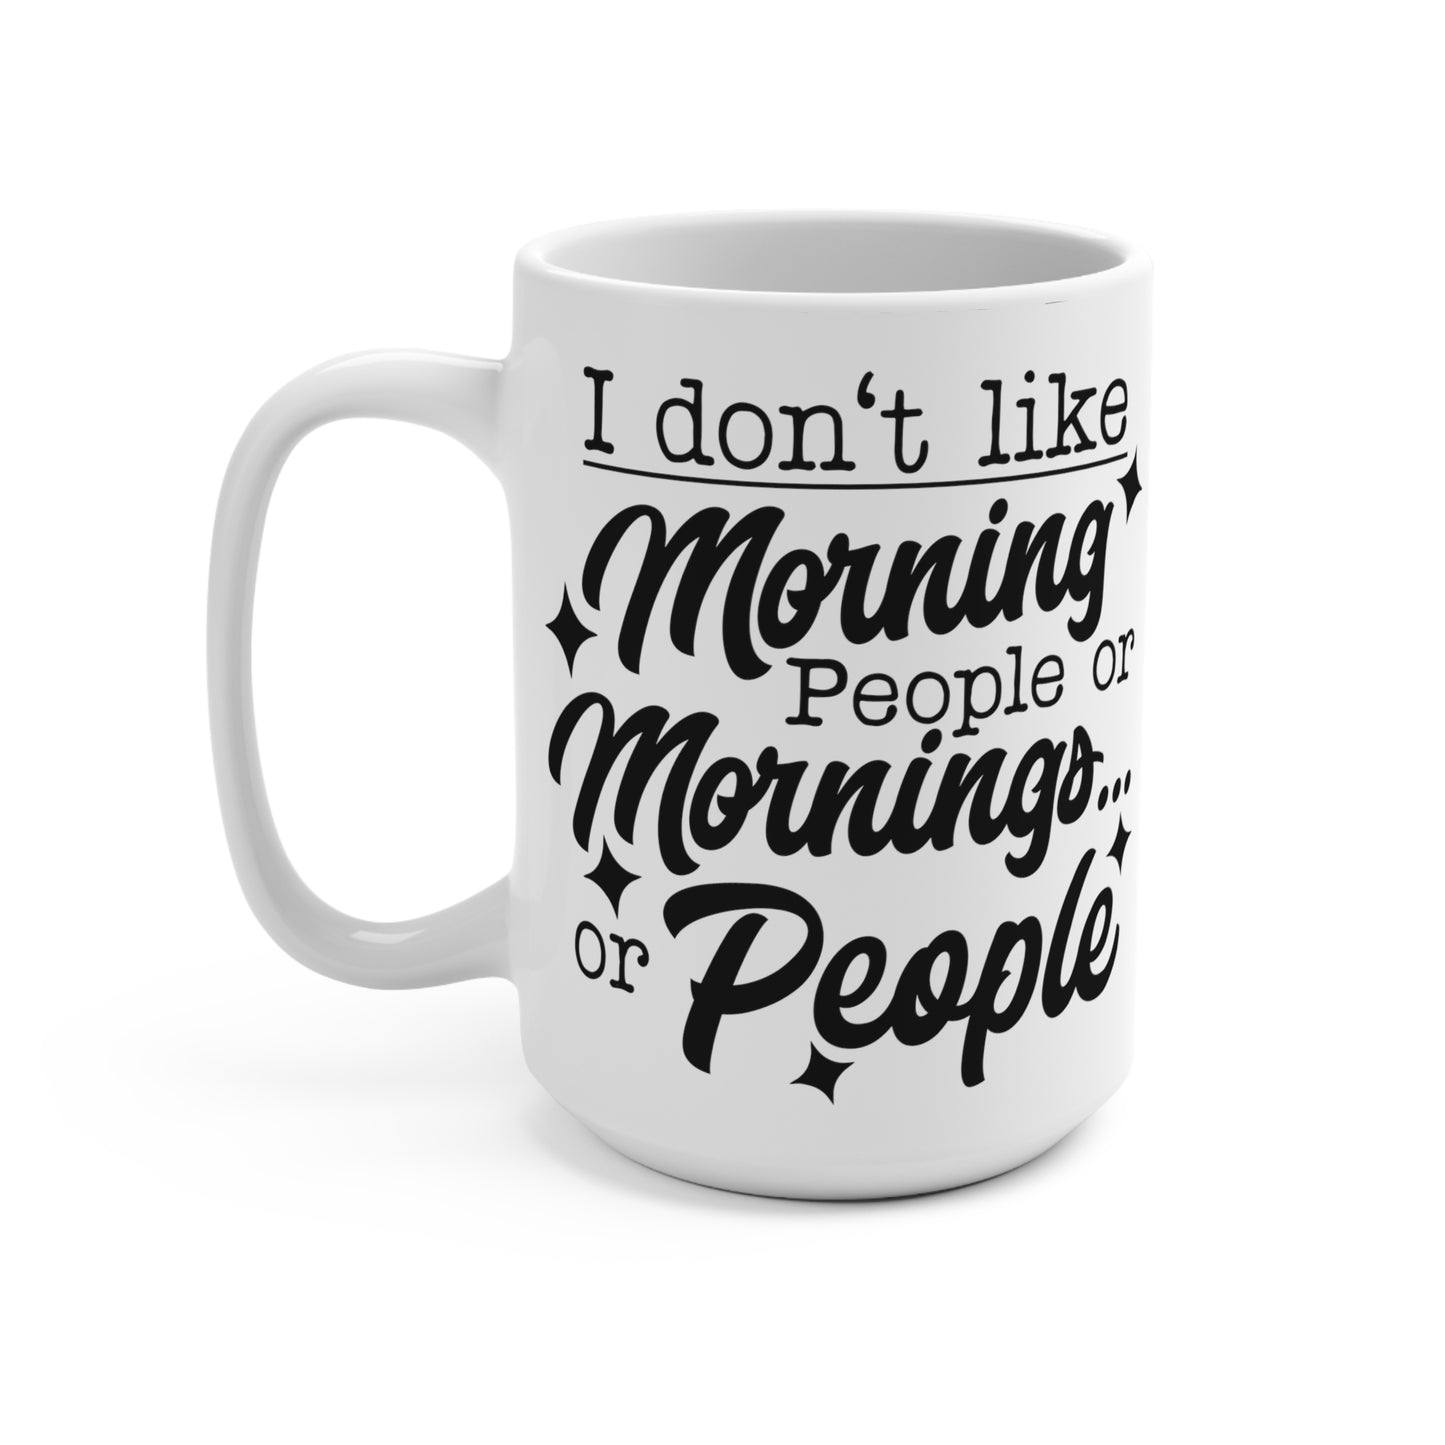 Funny Morning Quote Mug, Sarcastic Coffee Cup, Novelty Mug for Office, Gag Gift for Friend, Humorous Sayings, Typographic Mug for Coworkers